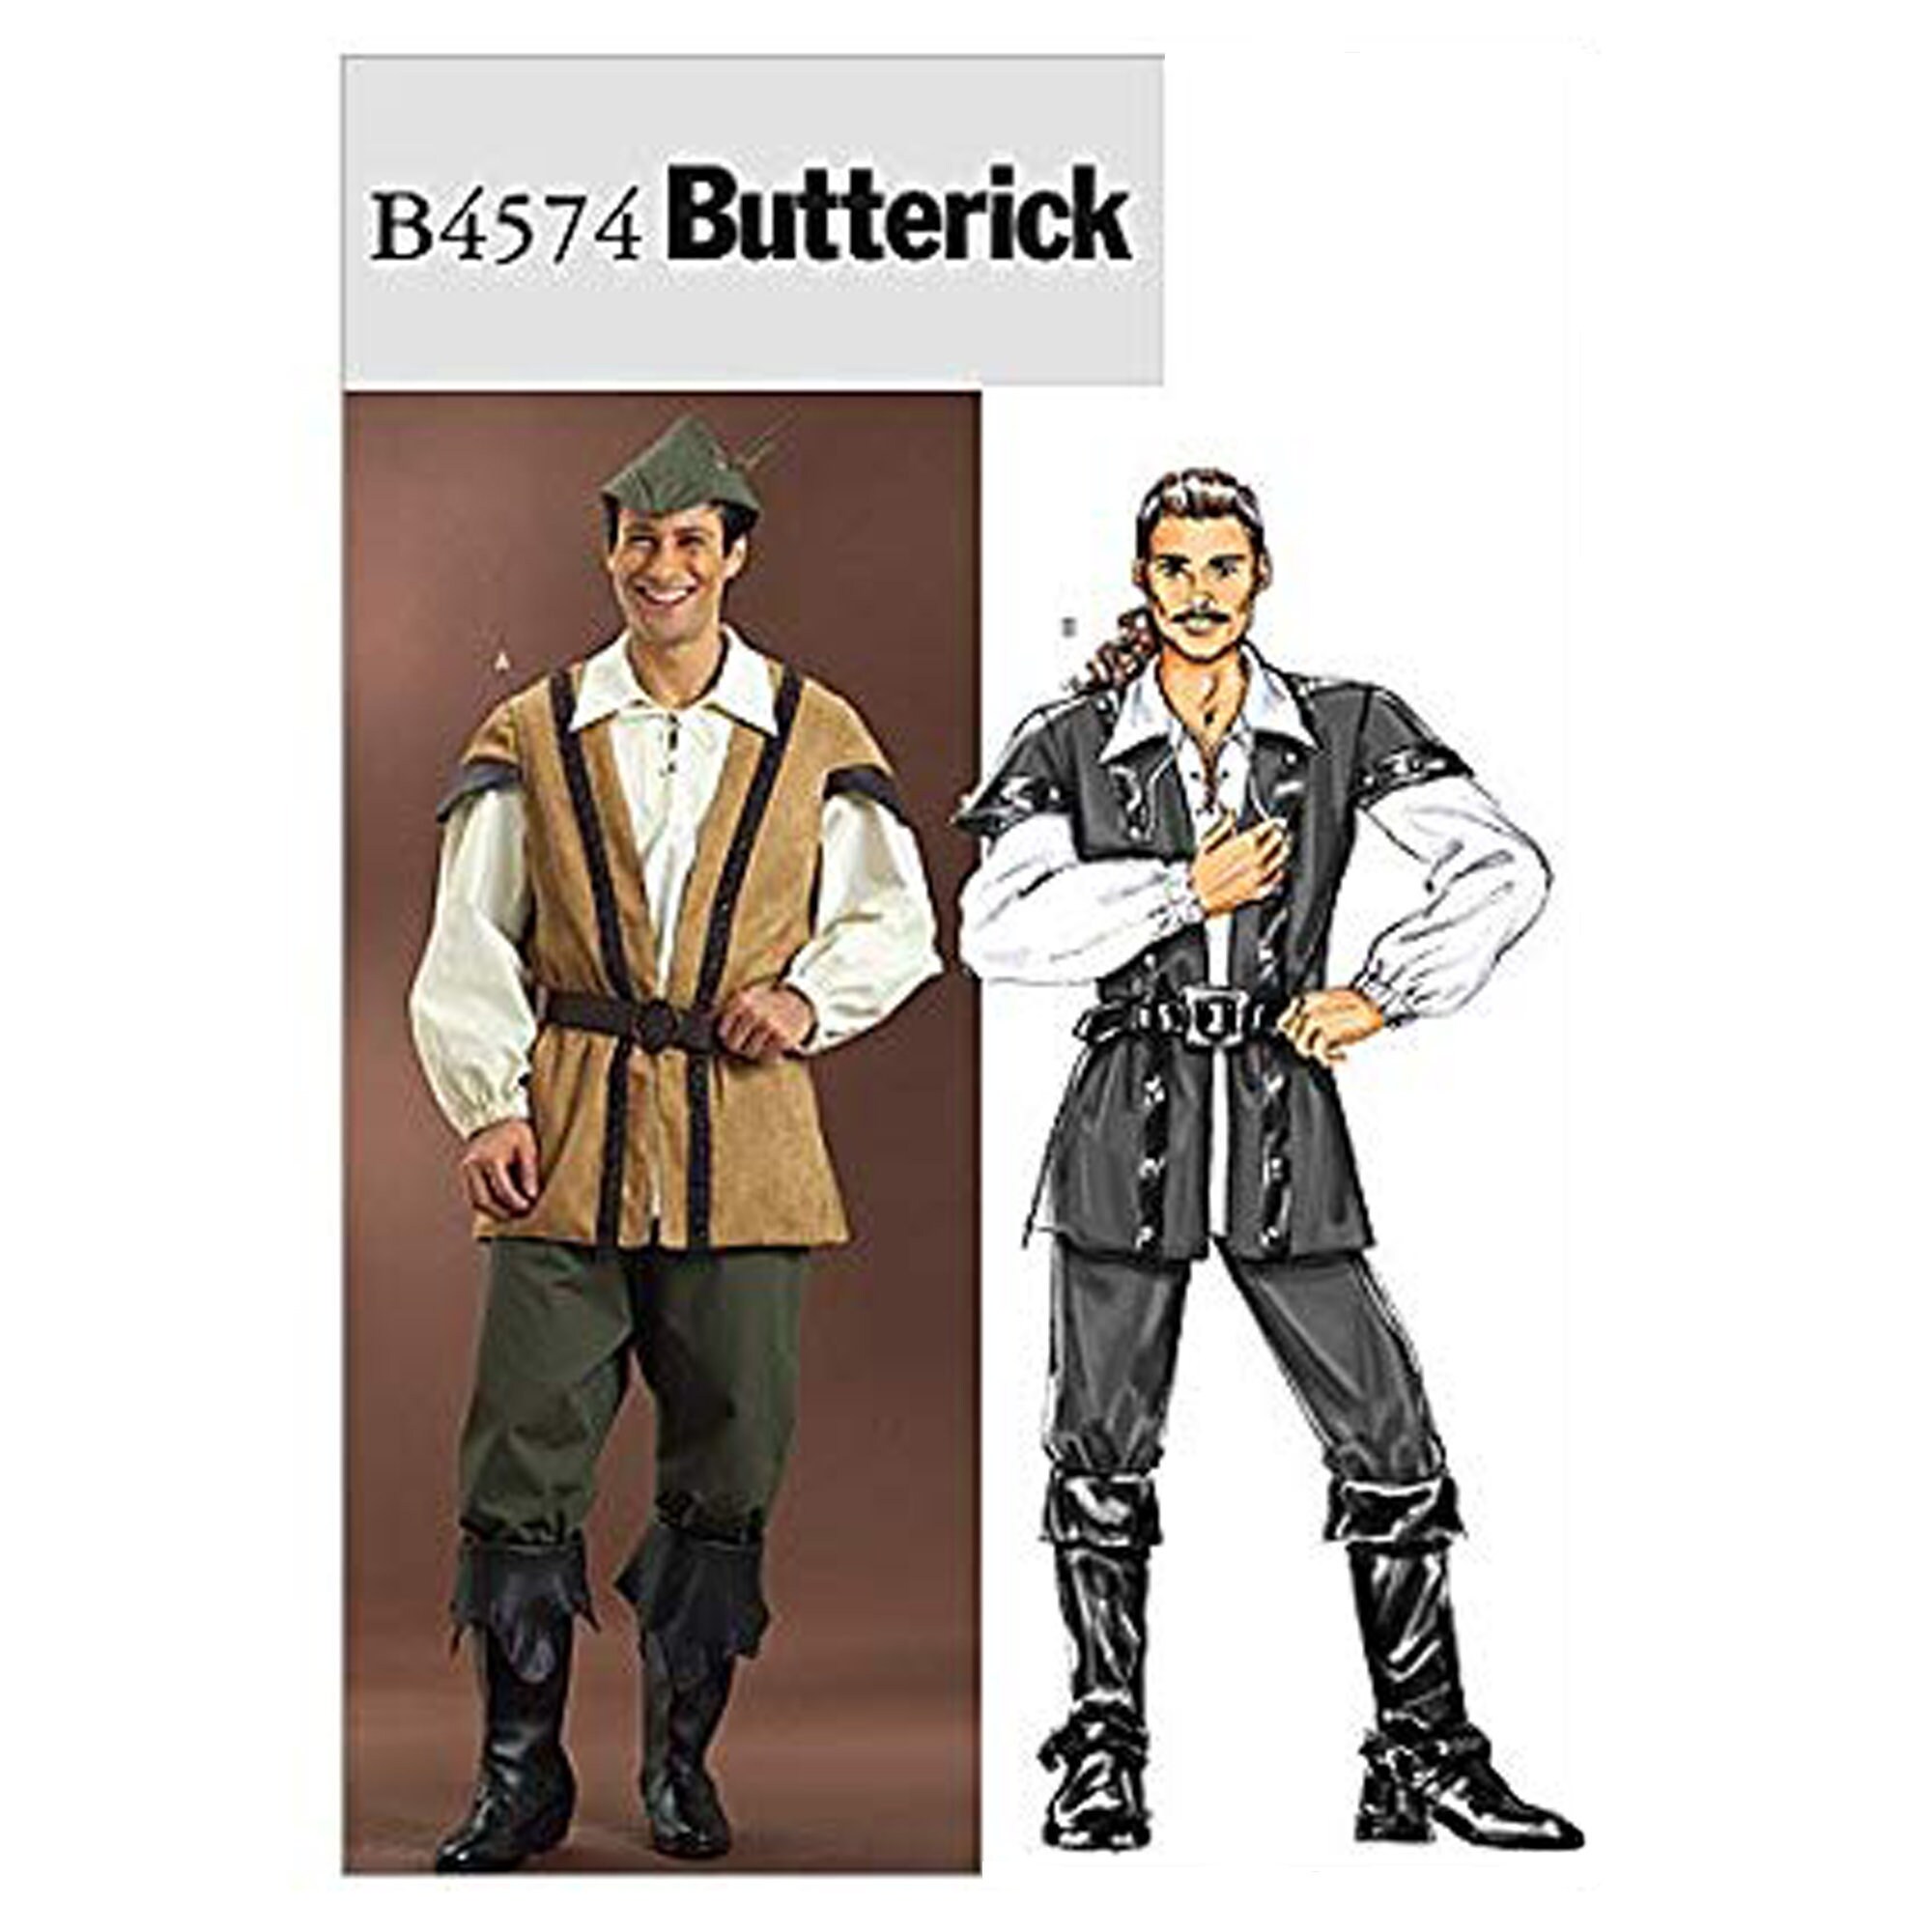 vest pants 2007 sash in Men/'s and Kids/' sizes McCalls 5446|MP229 UNCUT /& FF pull-over top Pirate costumes pattern coat K3028